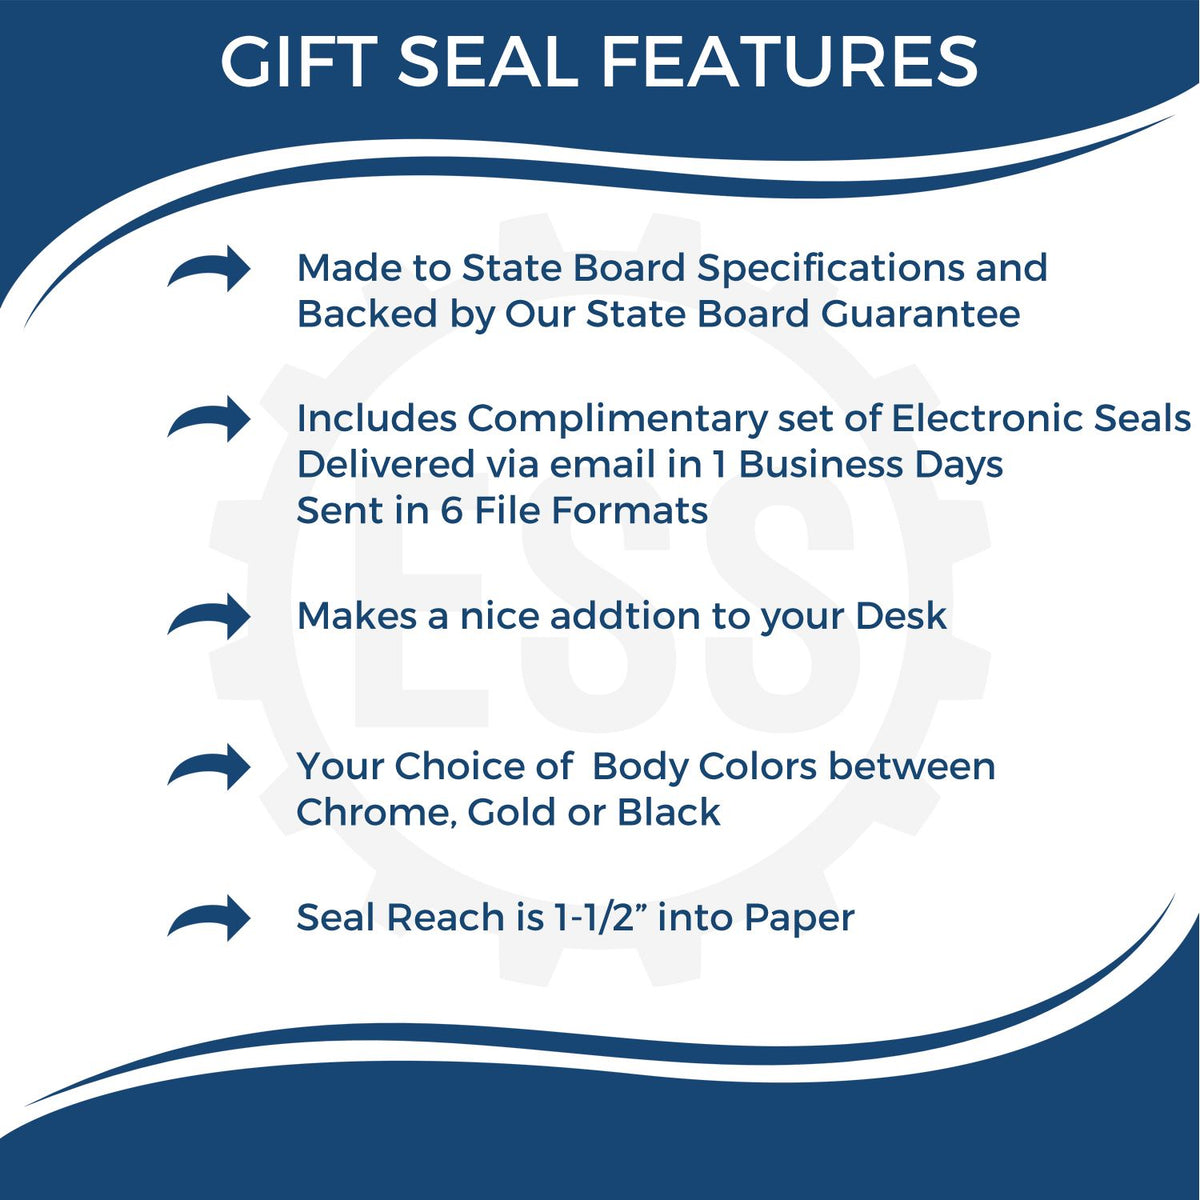 A picture of an infographic highlighting the selling points for the Gift Rhode Island Land Surveyor Seal